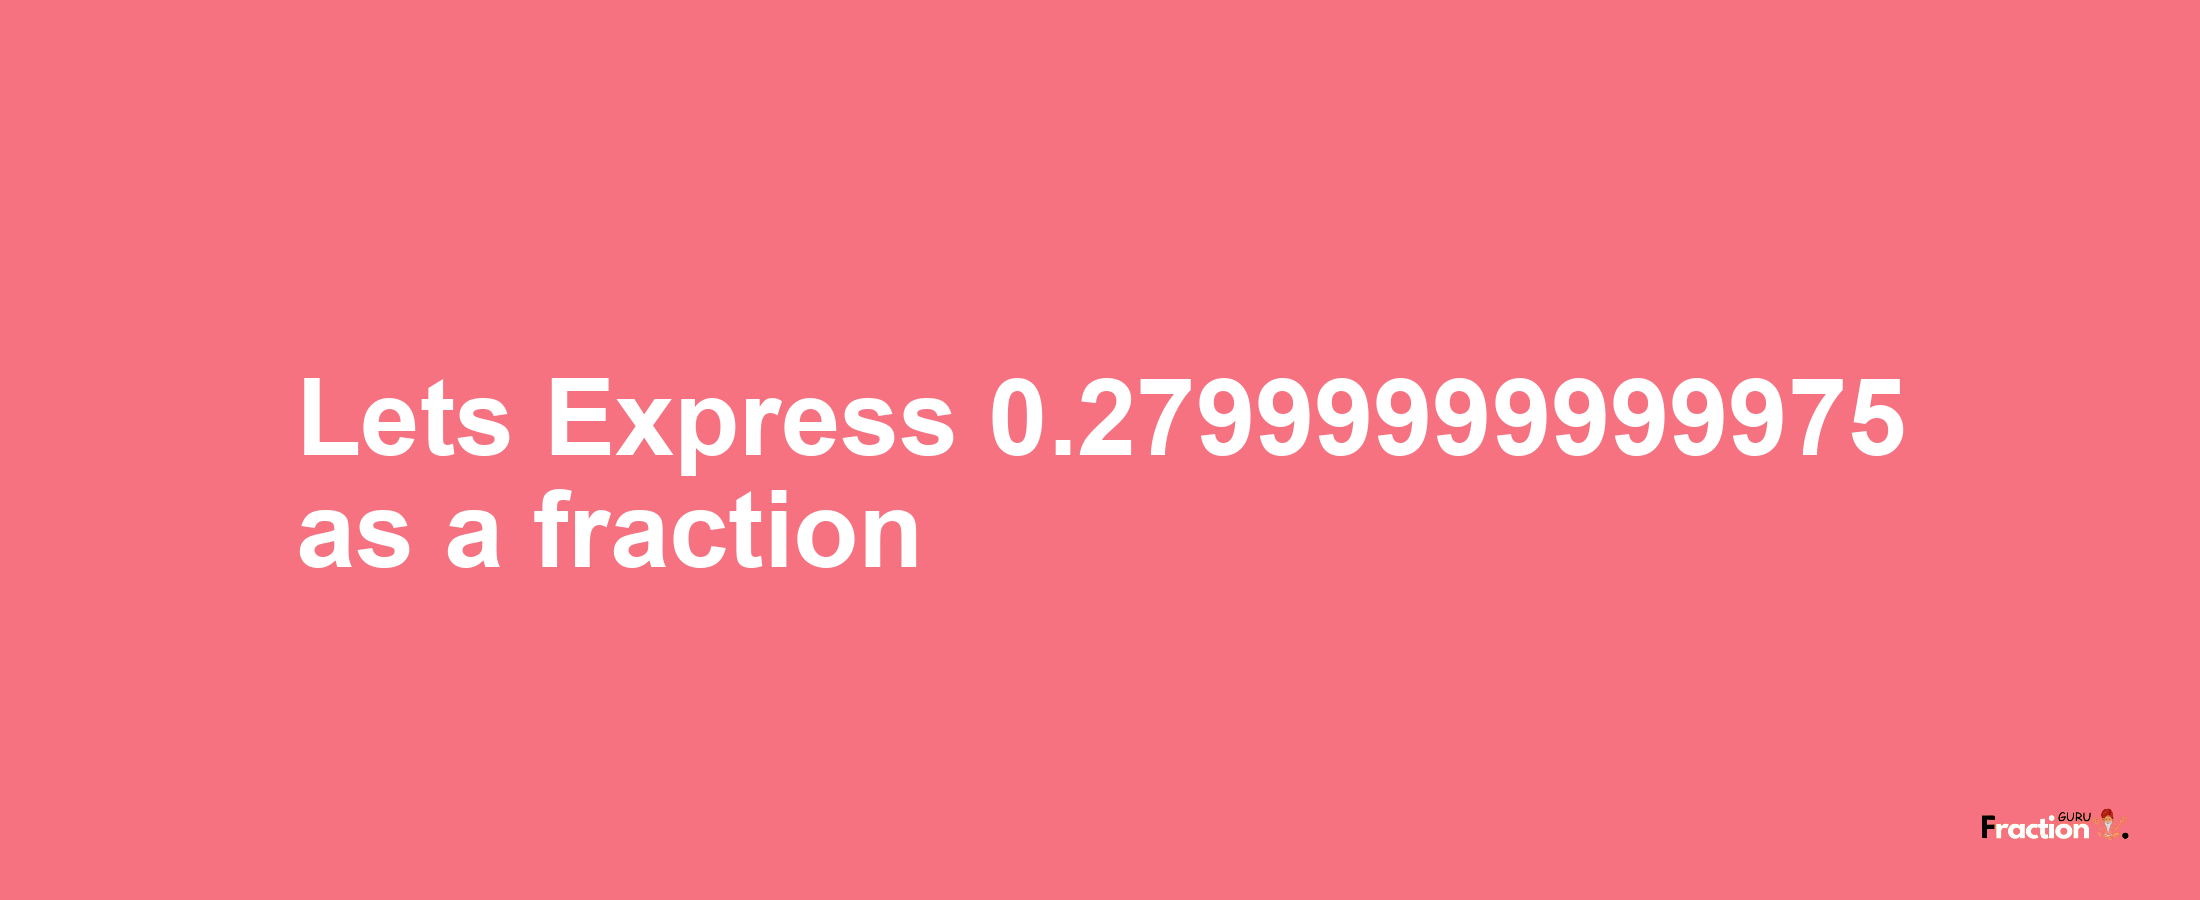 Lets Express 0.27999999999975 as afraction